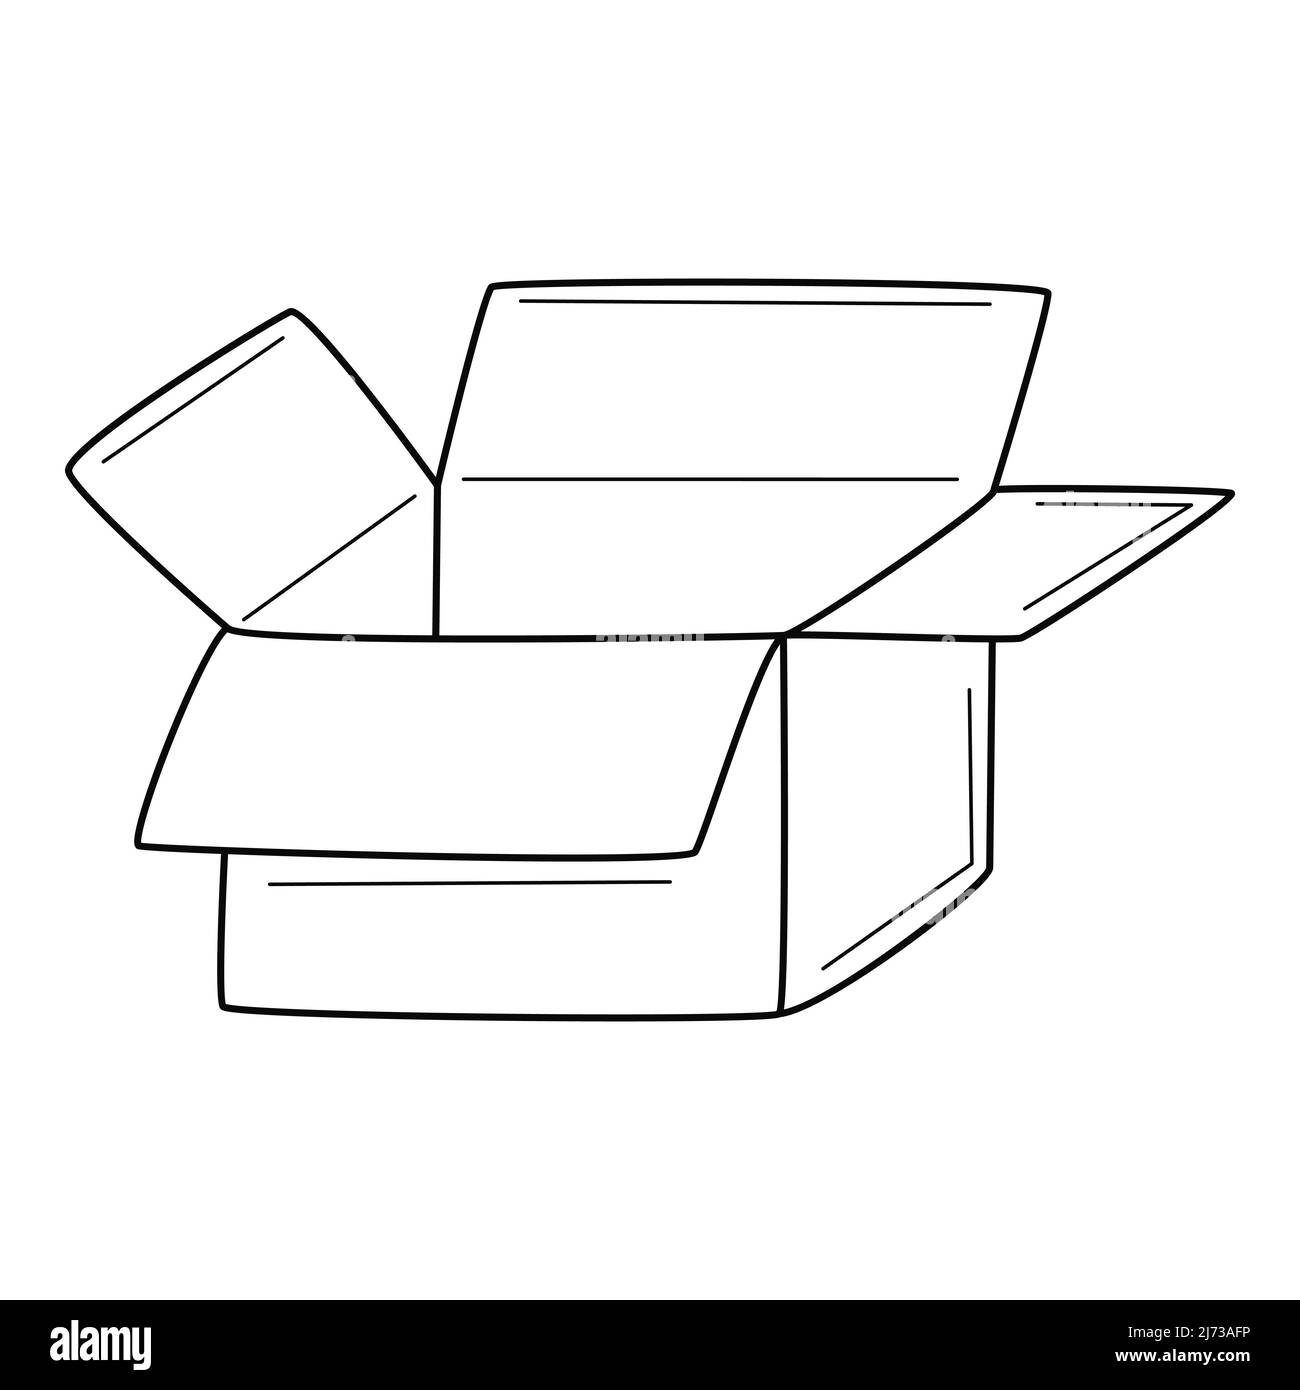 25+ Thousand Cardboard Box Drawing Royalty-Free Images, Stock